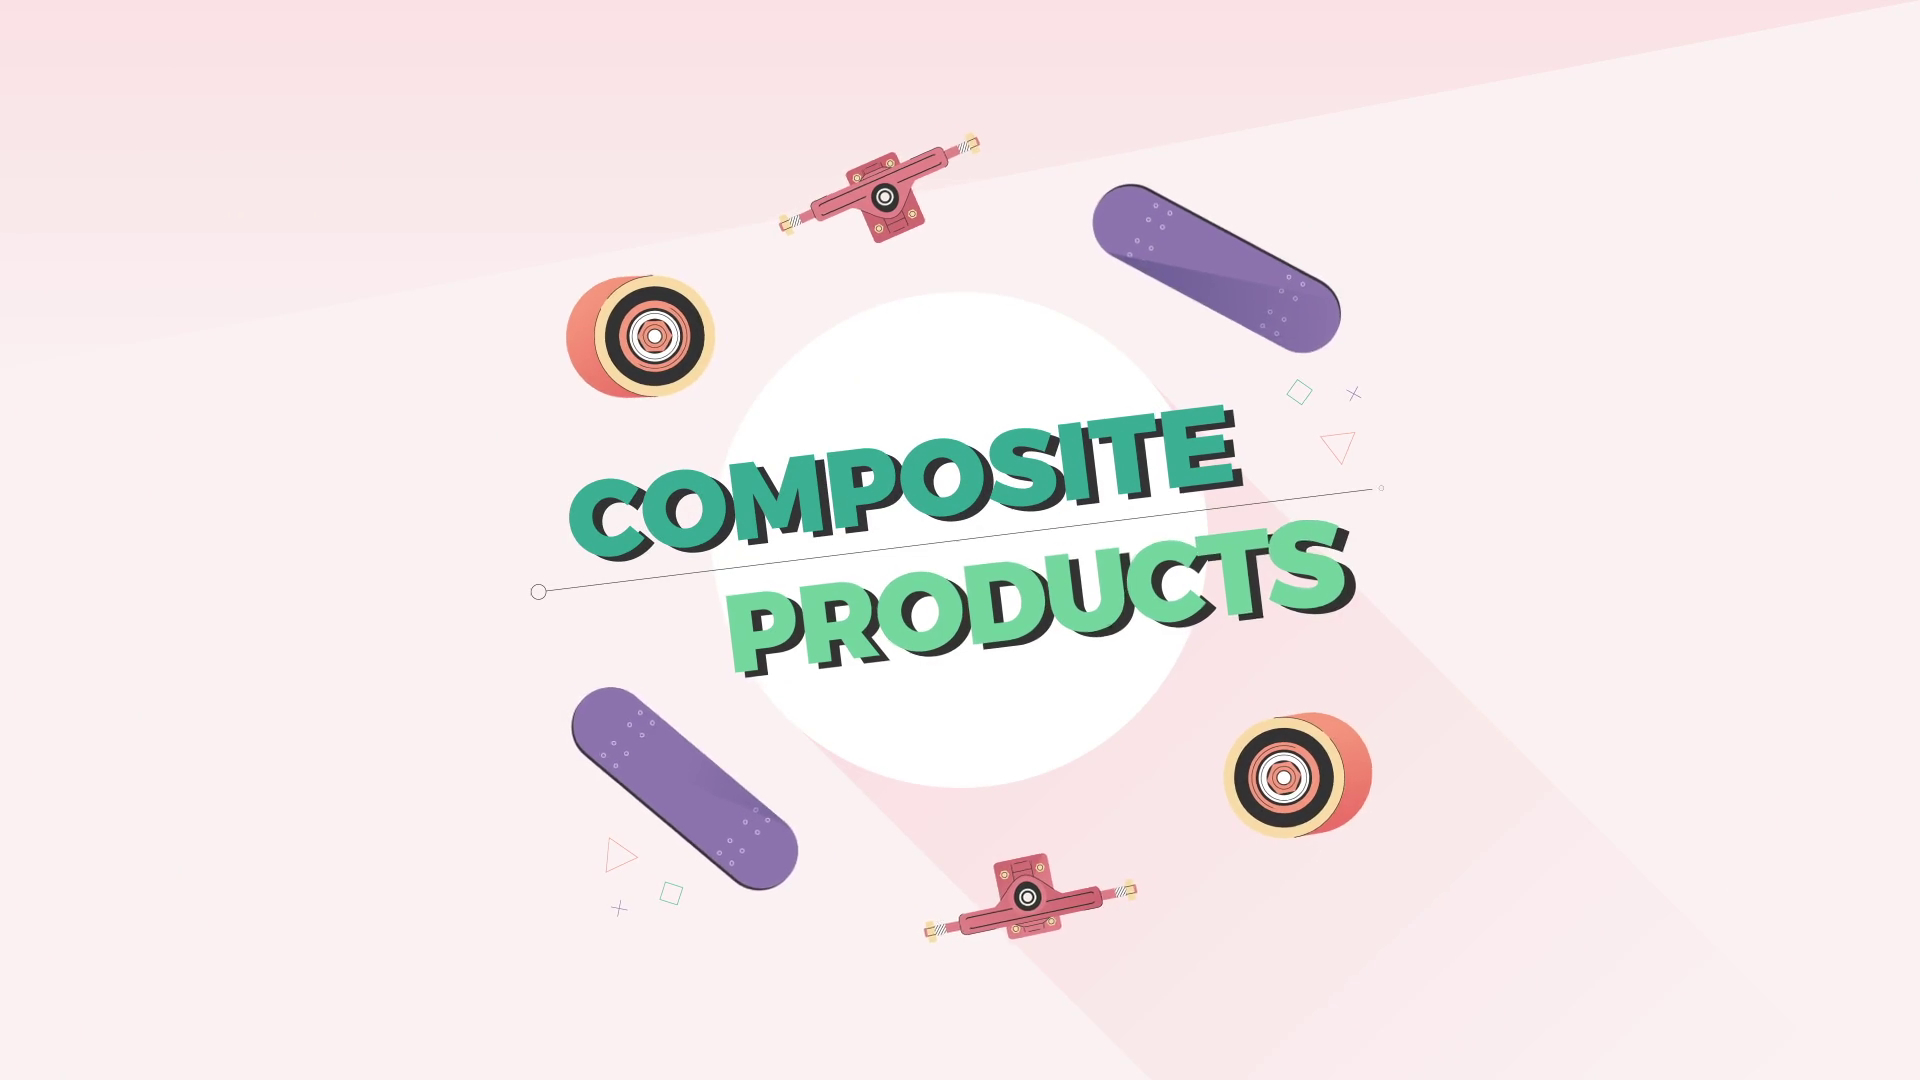 WooCommerce Composite Products 